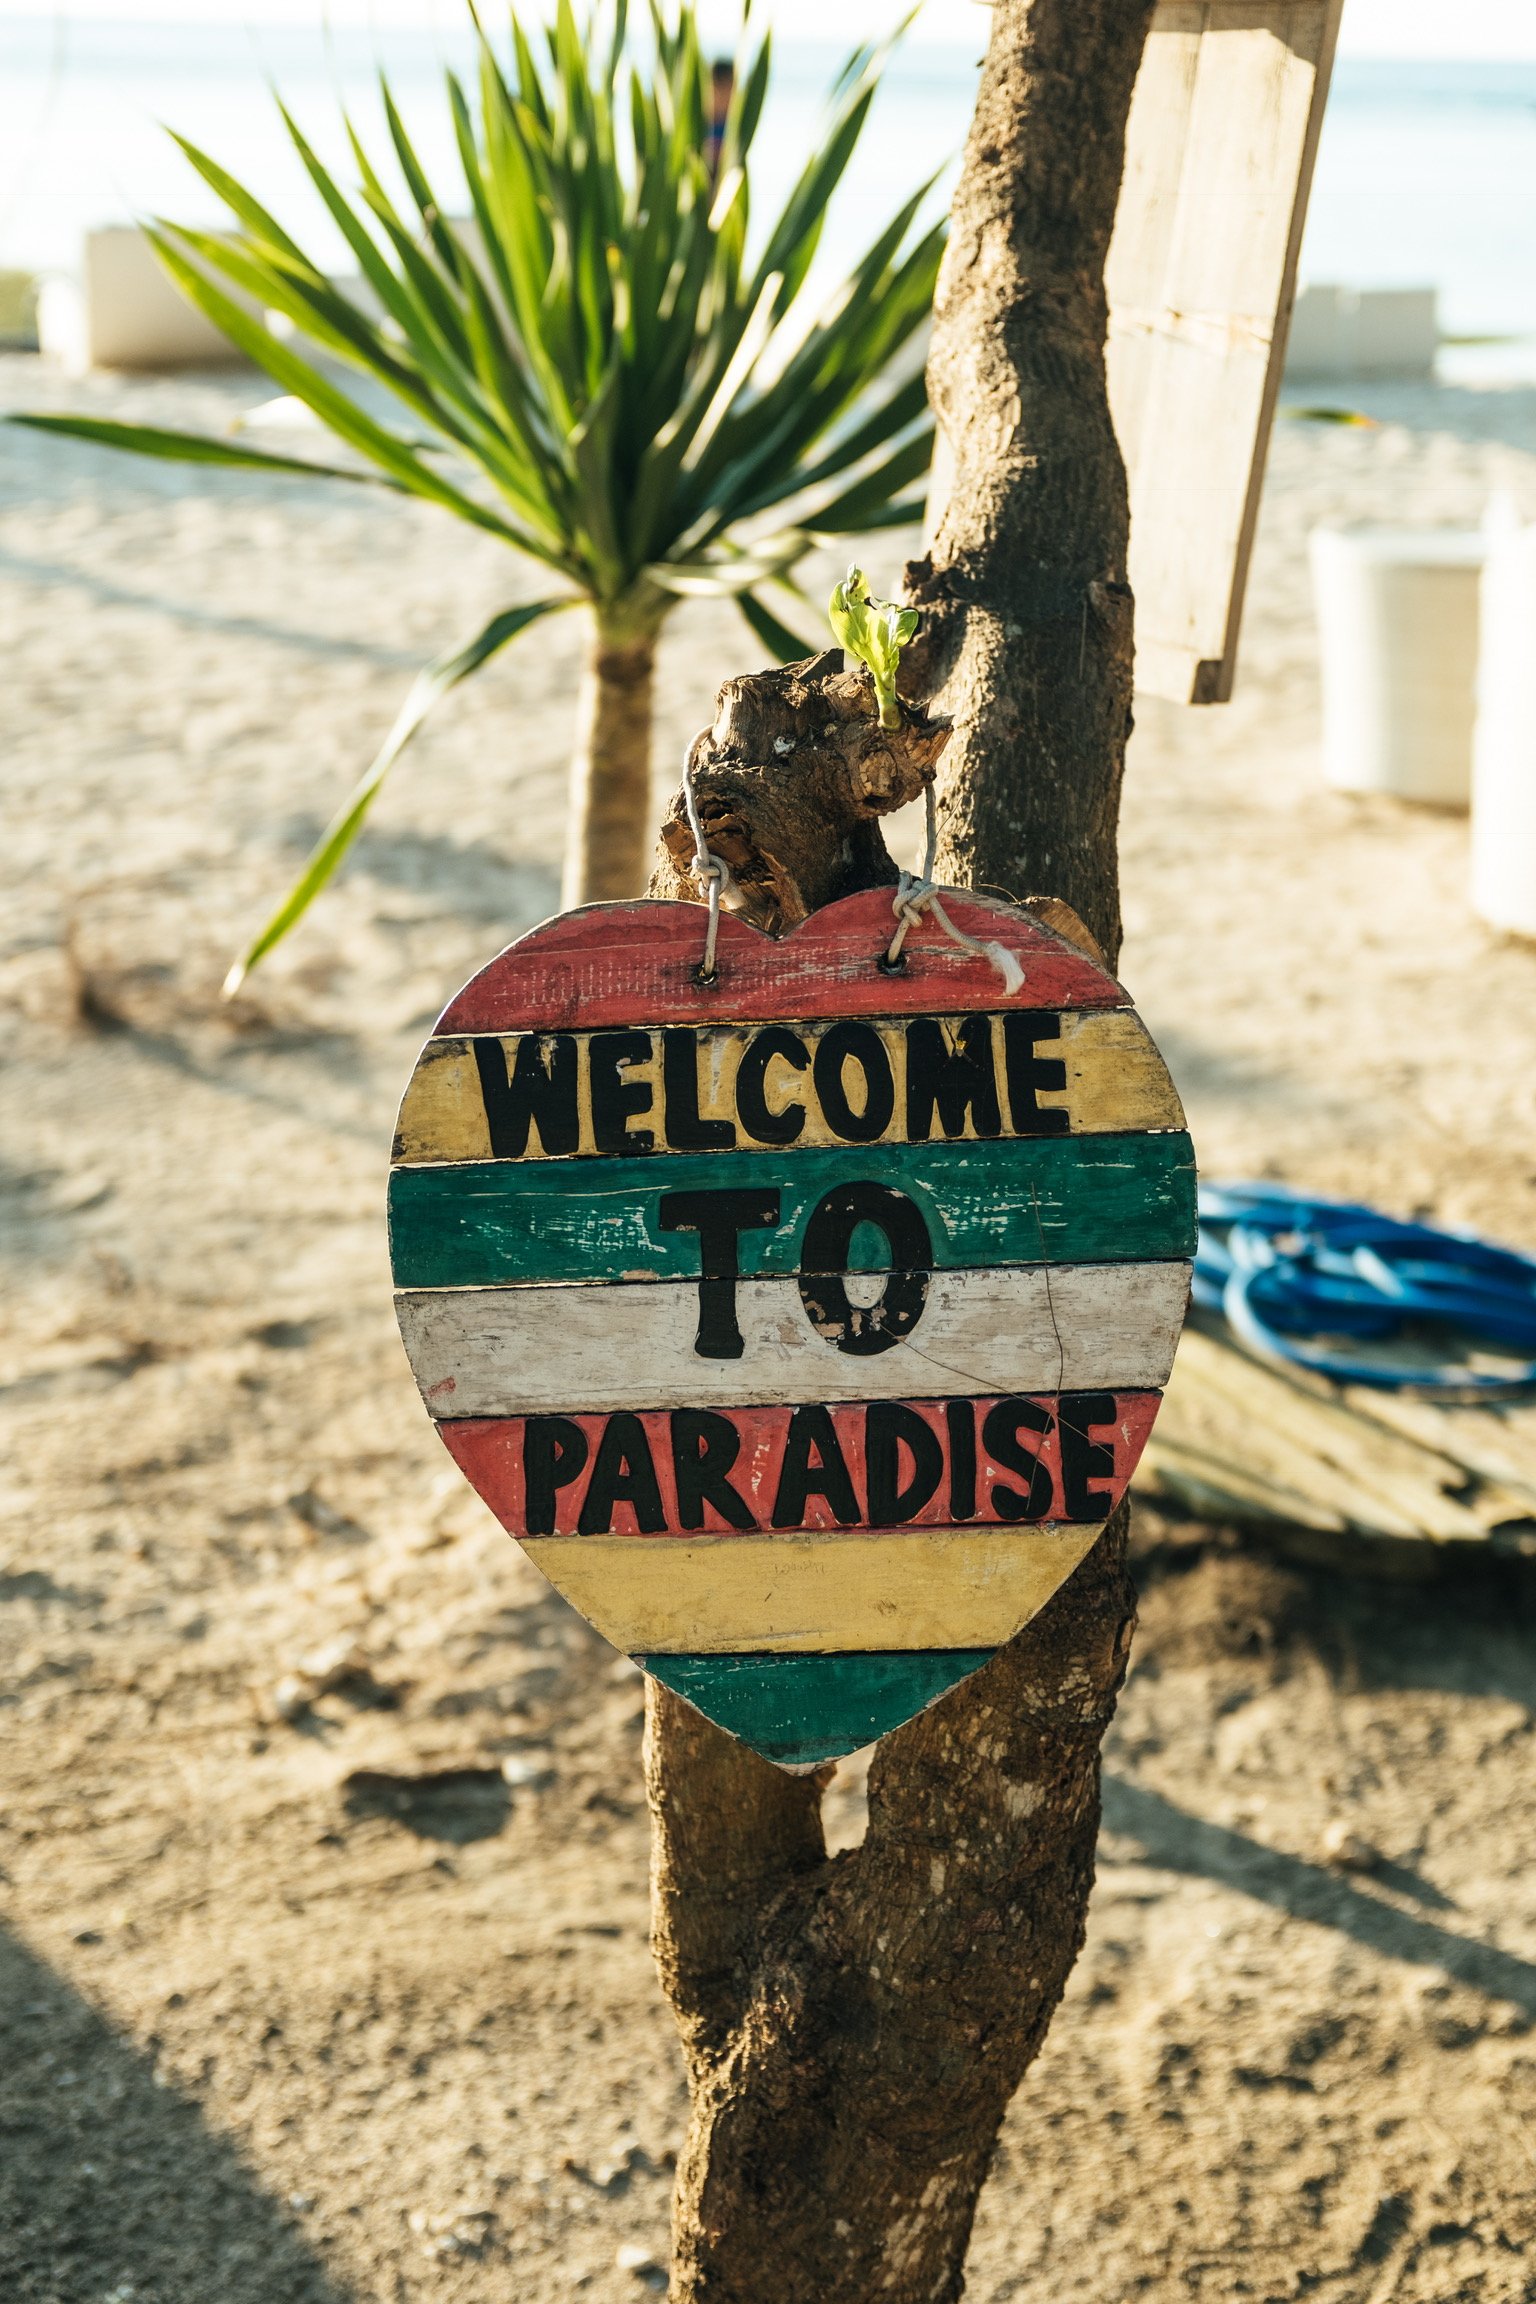 Welcome to Bali paradise, knowing you are insured